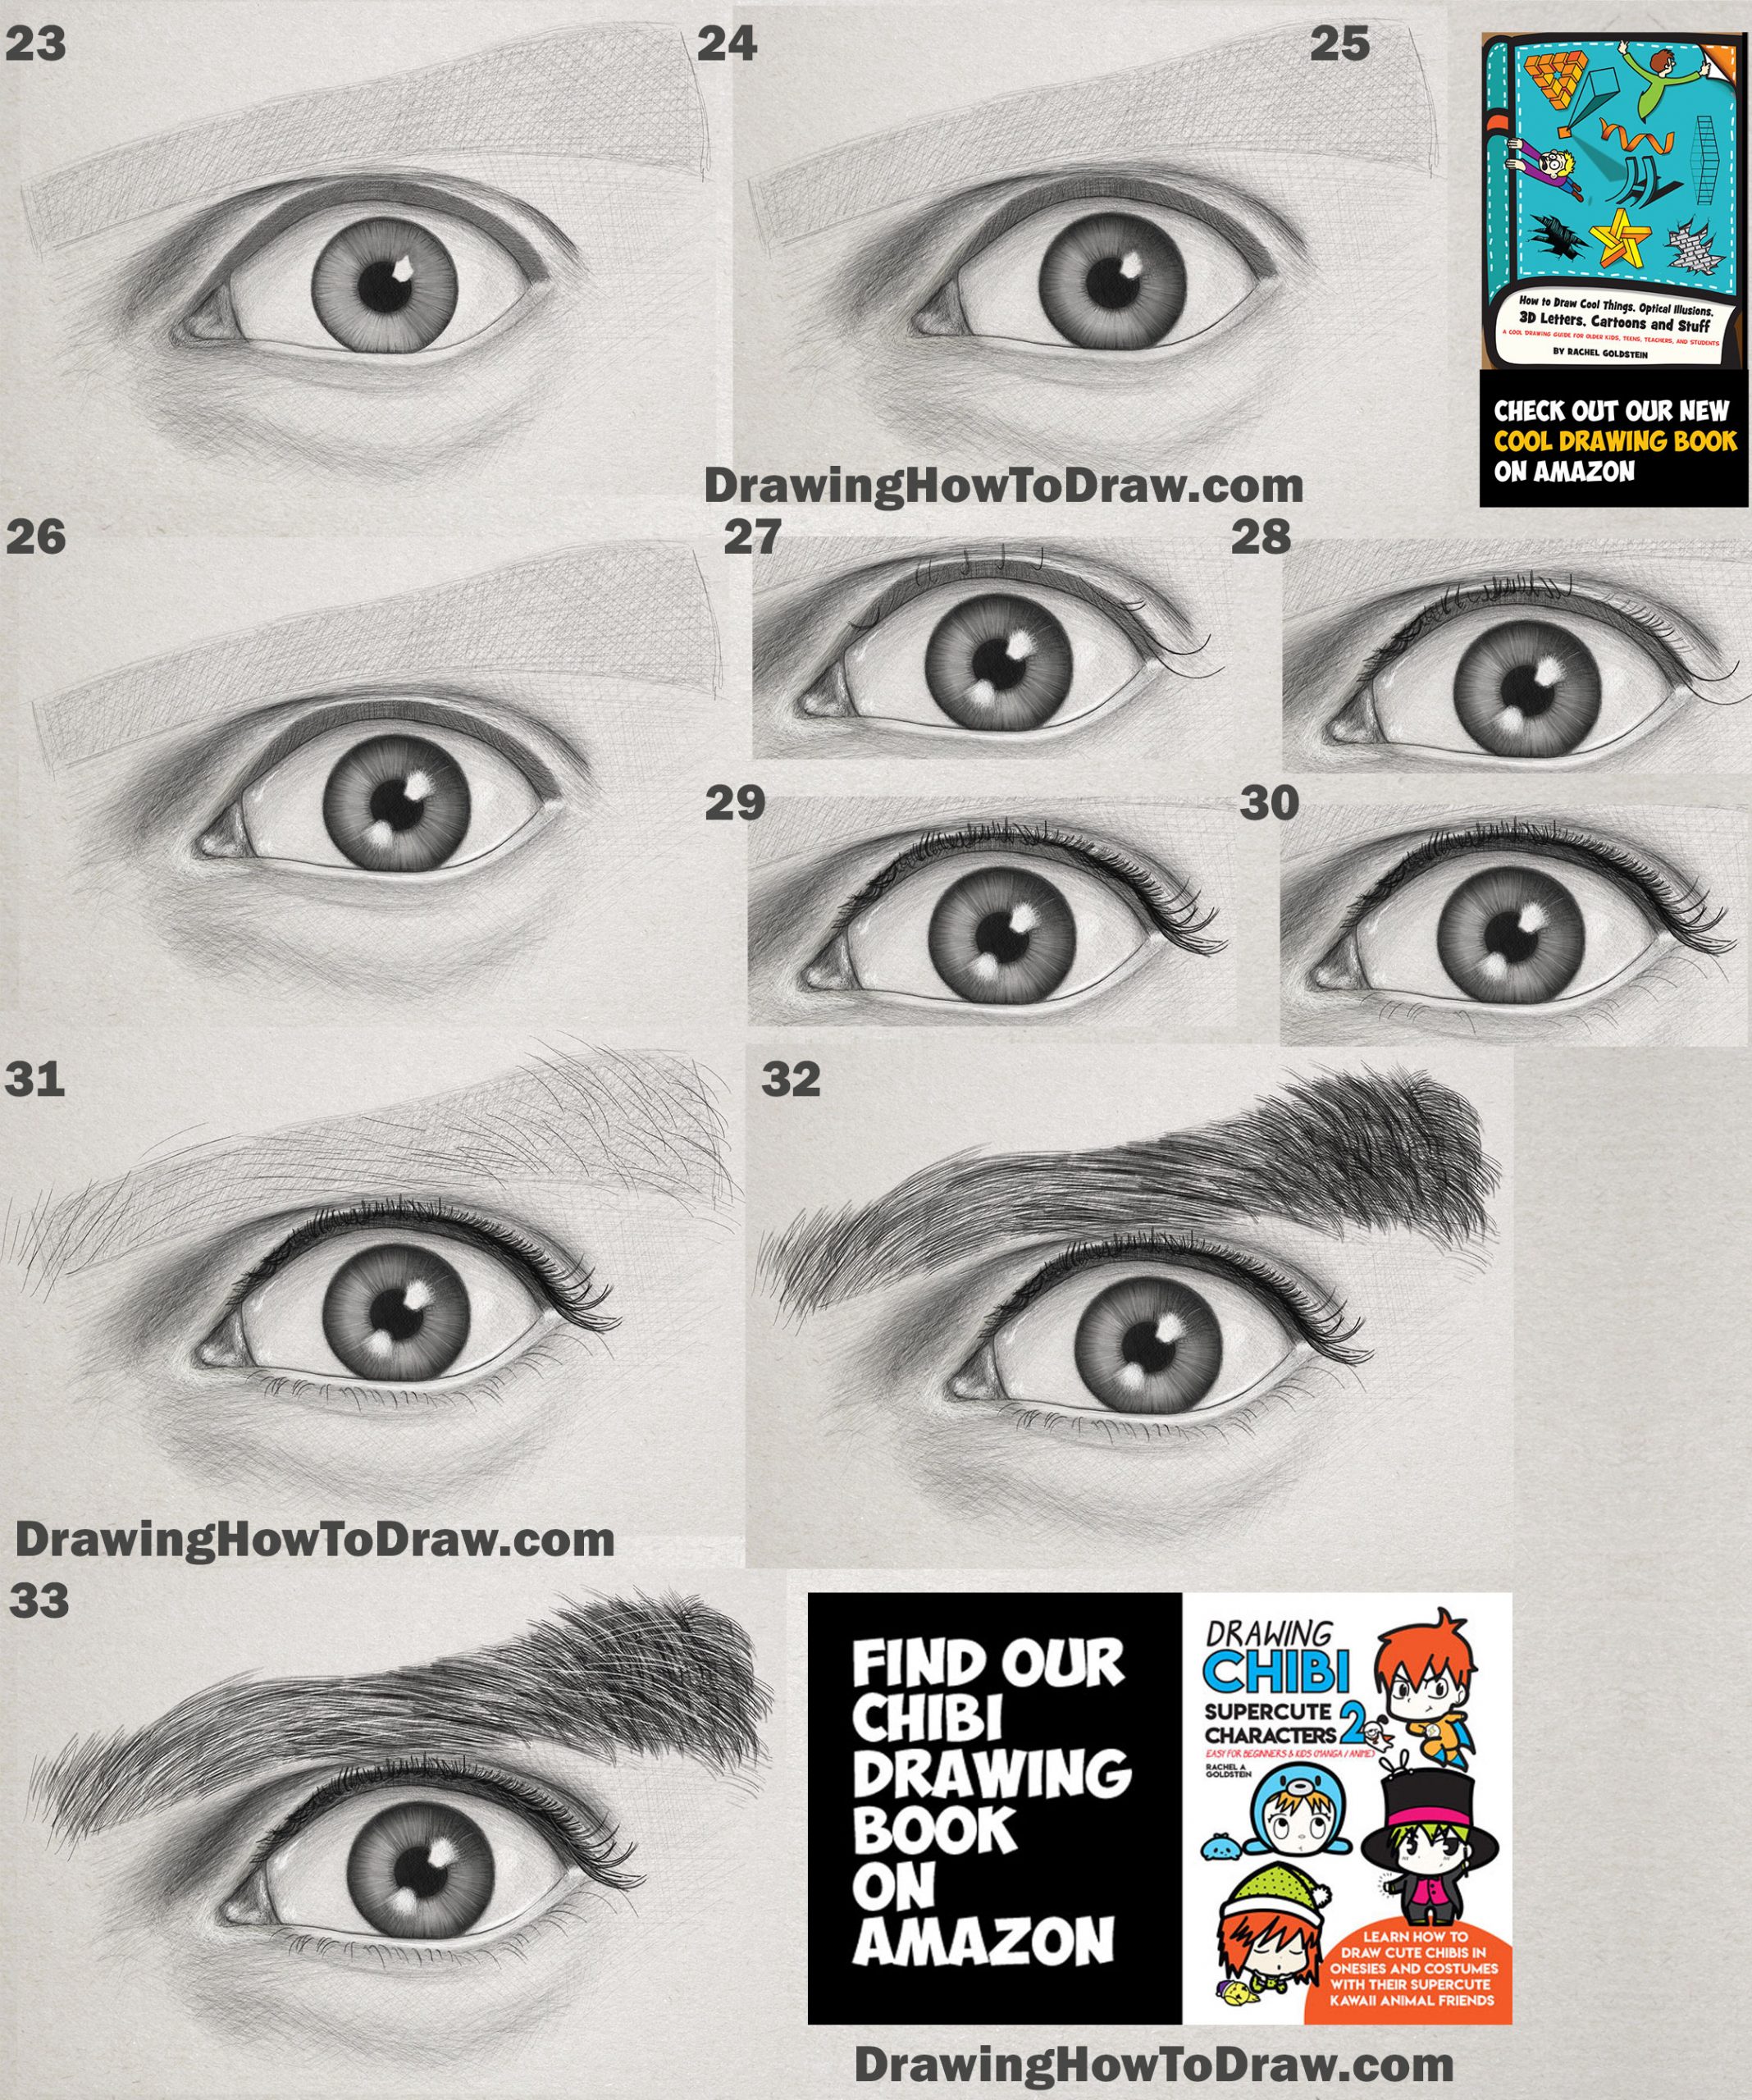 How to Draw an Eye - Realistic Man's Eye - Step by Step Drawing